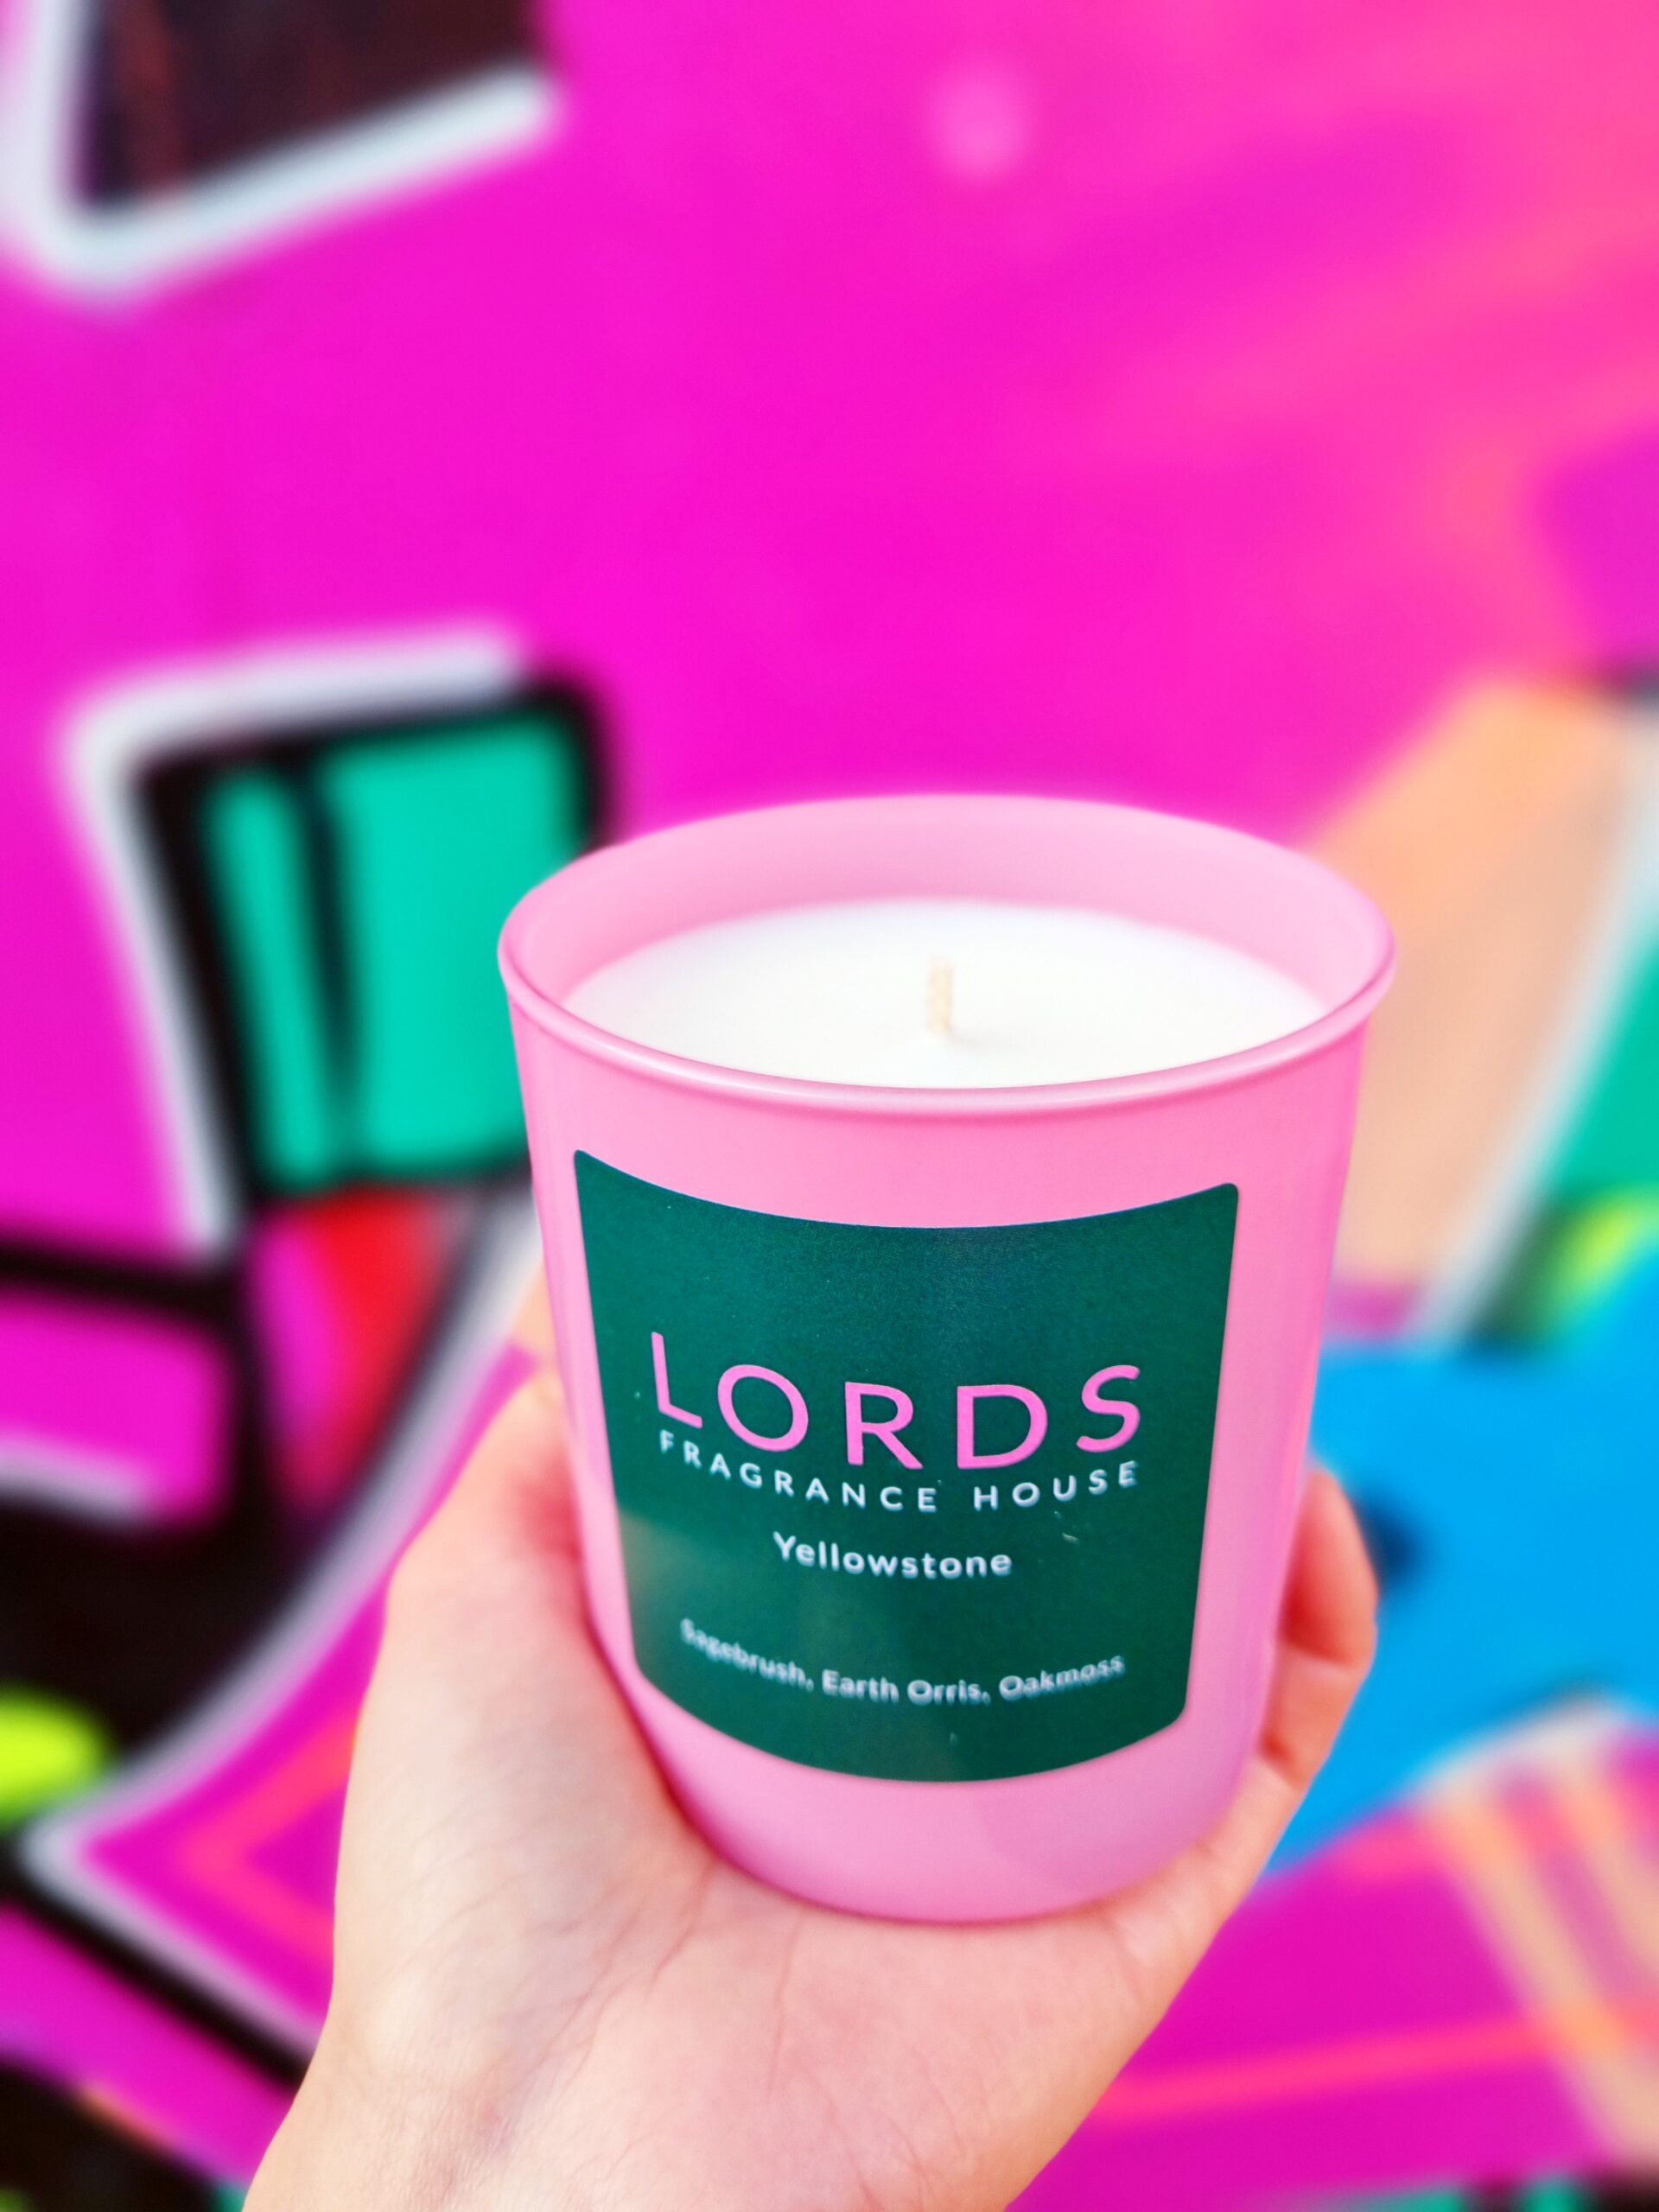 <img src="lords.jpg" alt="lords fragrance colourful vegan products"/> 